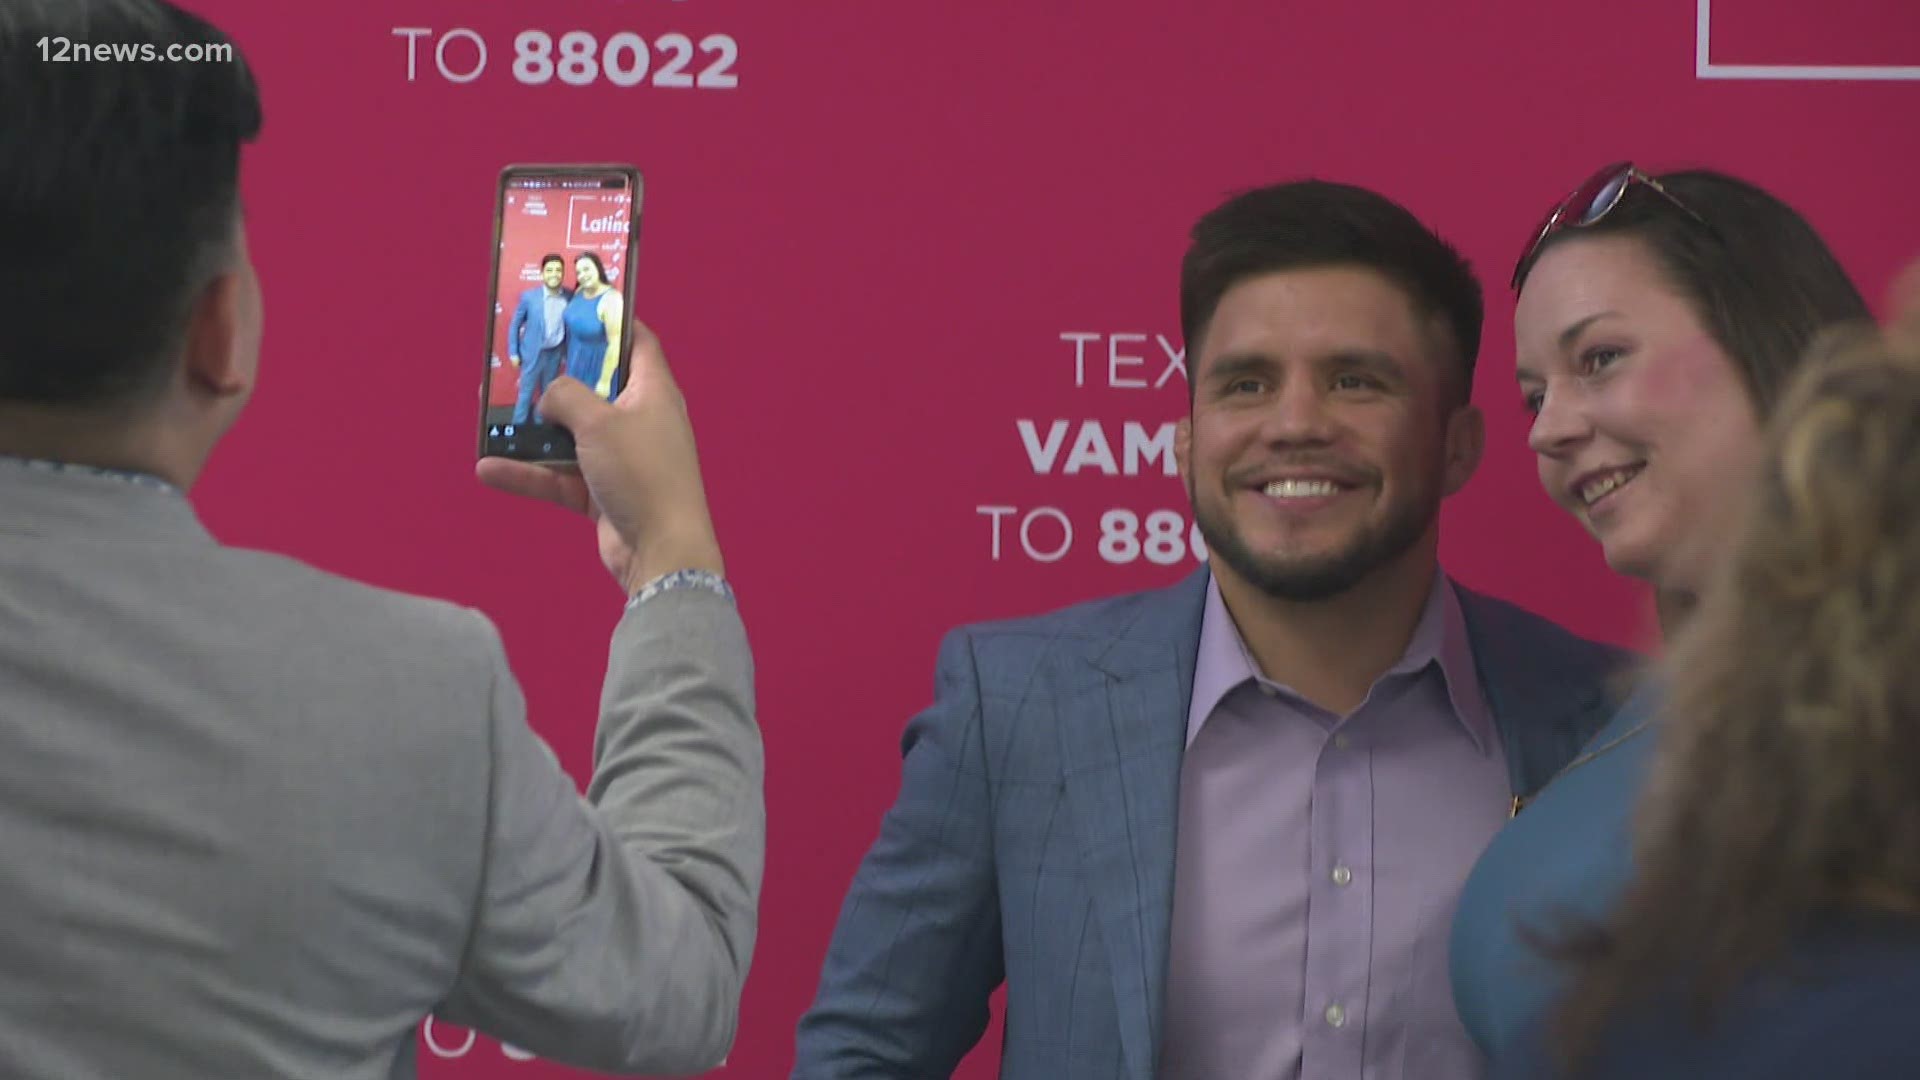 Henry Cejudo is one of Phoenix’s most famous athletes, and he's using his fame to become one of Donald Trump’s most vocal Latino supporters.